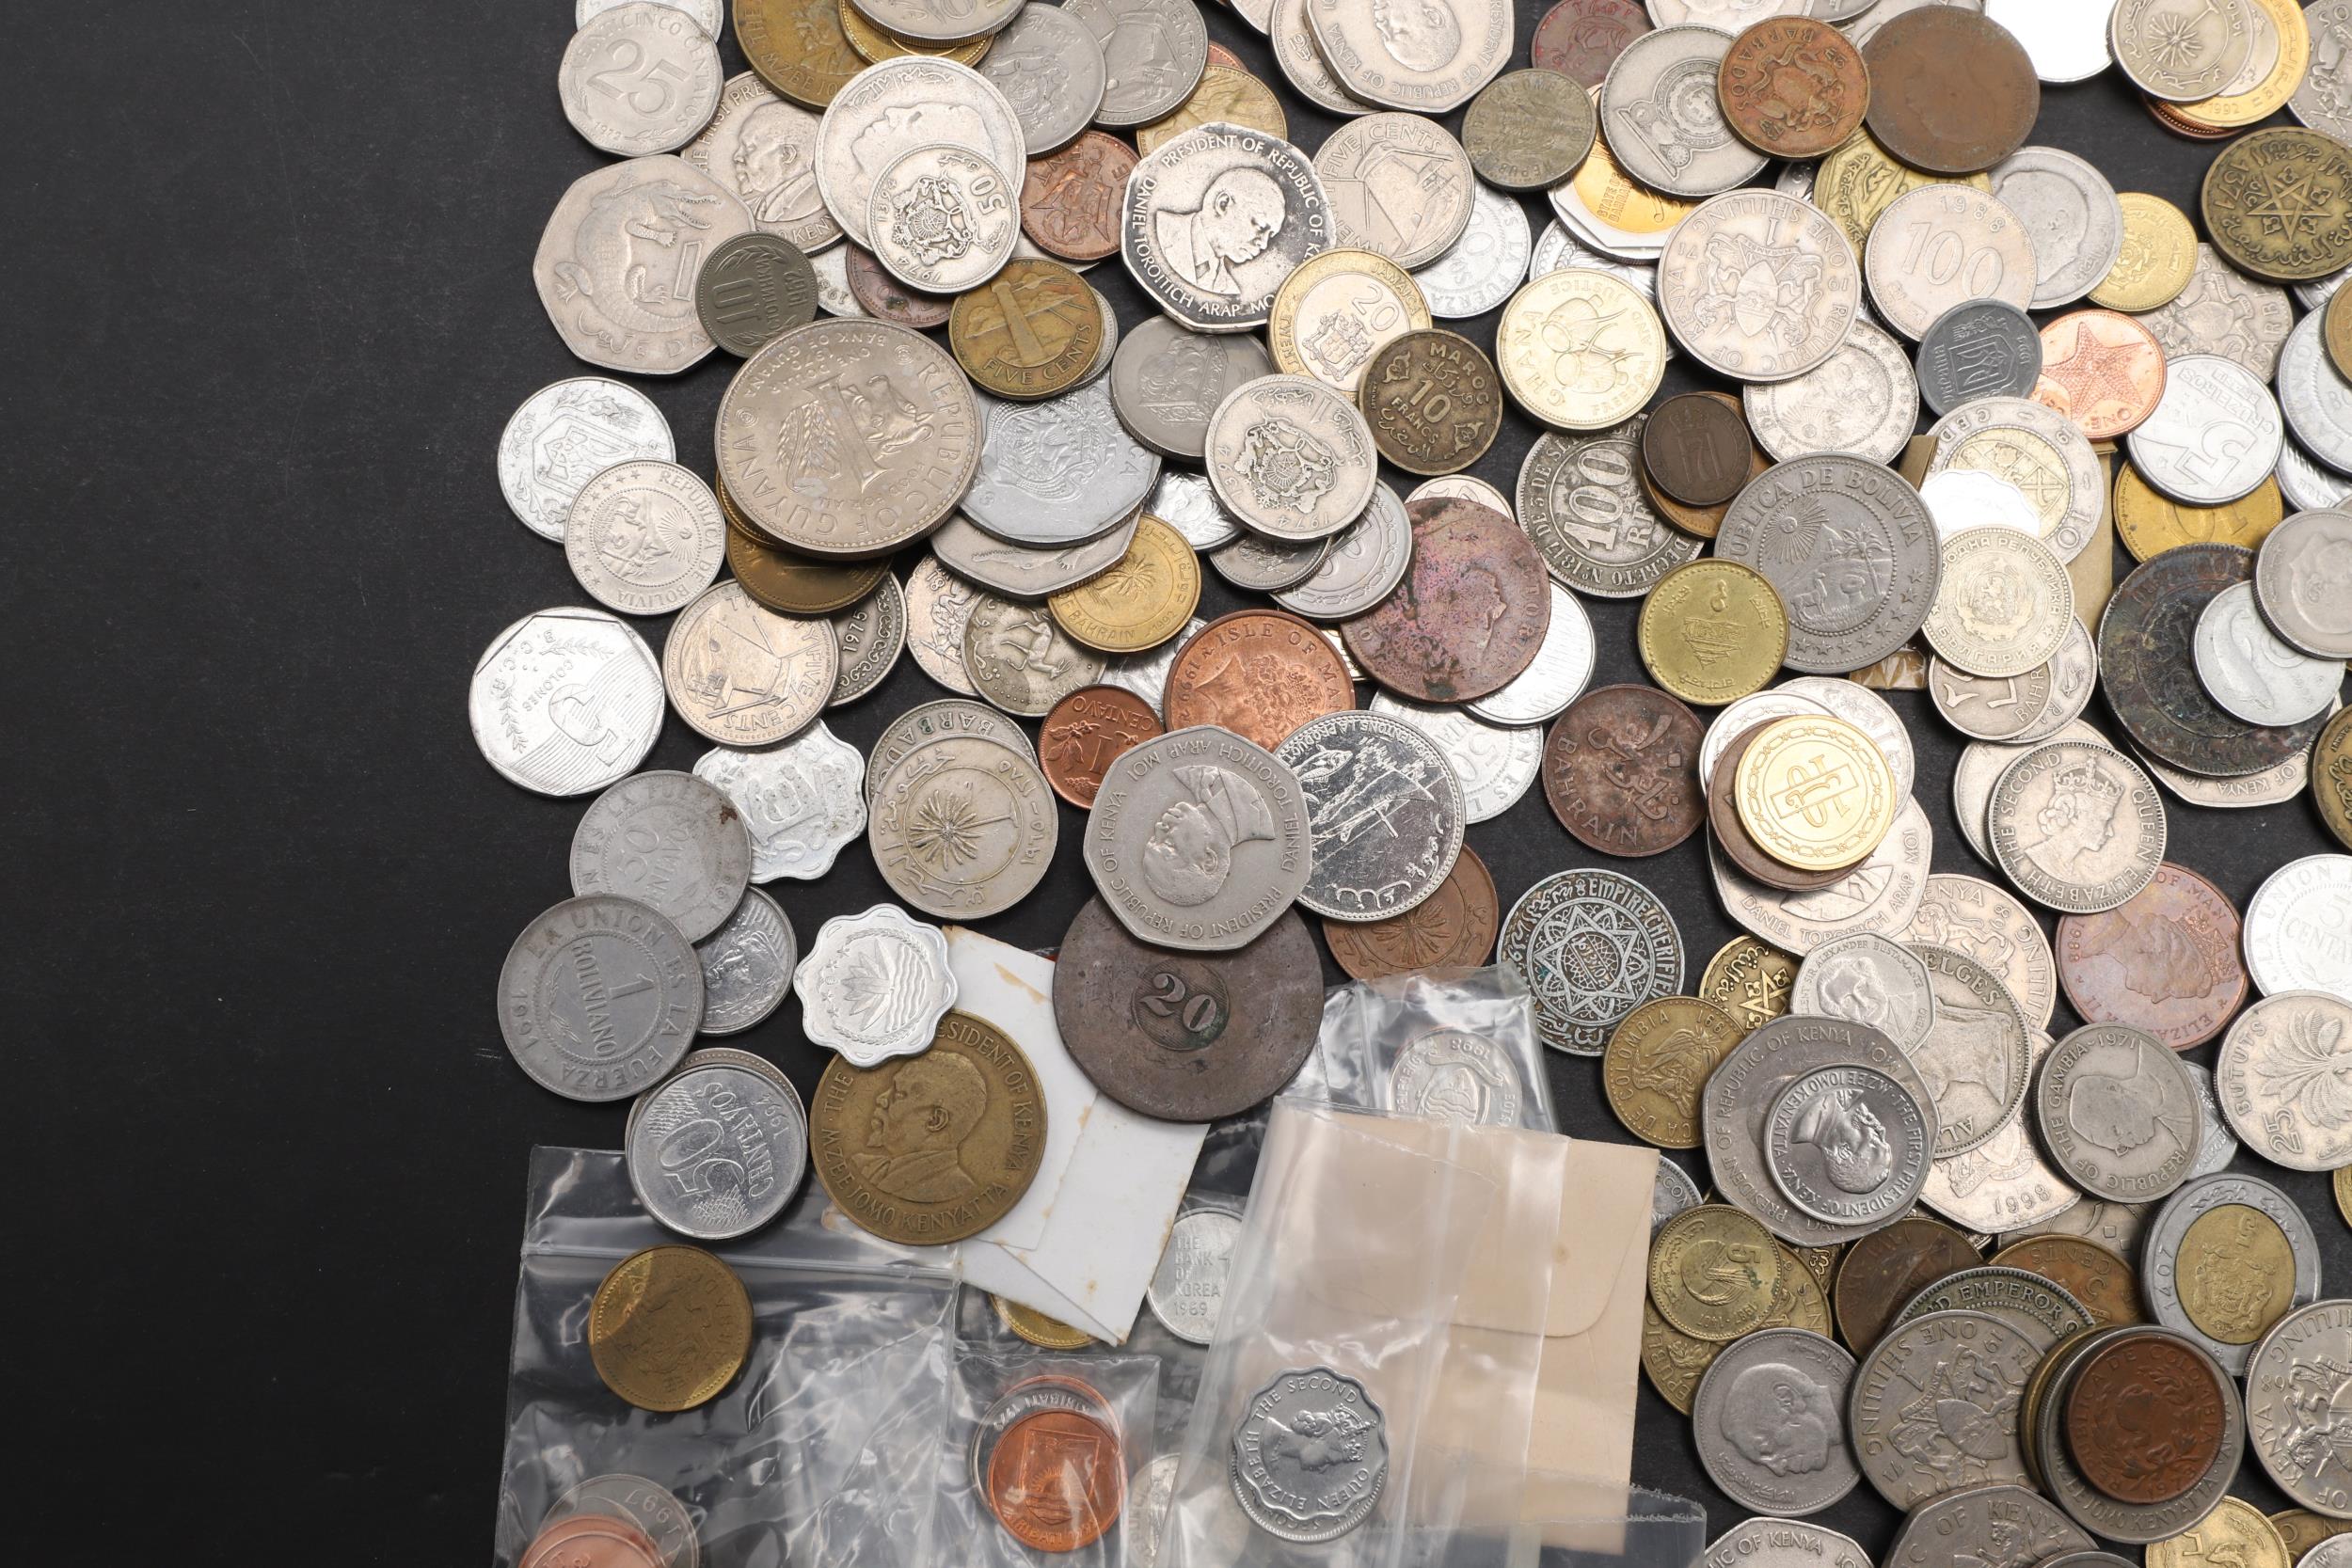 A MIXED COLLECTION OF WORLD COINS FROM VARIOUS COUNTRIES TO INCLUDE COLUMBIA, KENYA, BRASIL AND MANY - Image 4 of 7